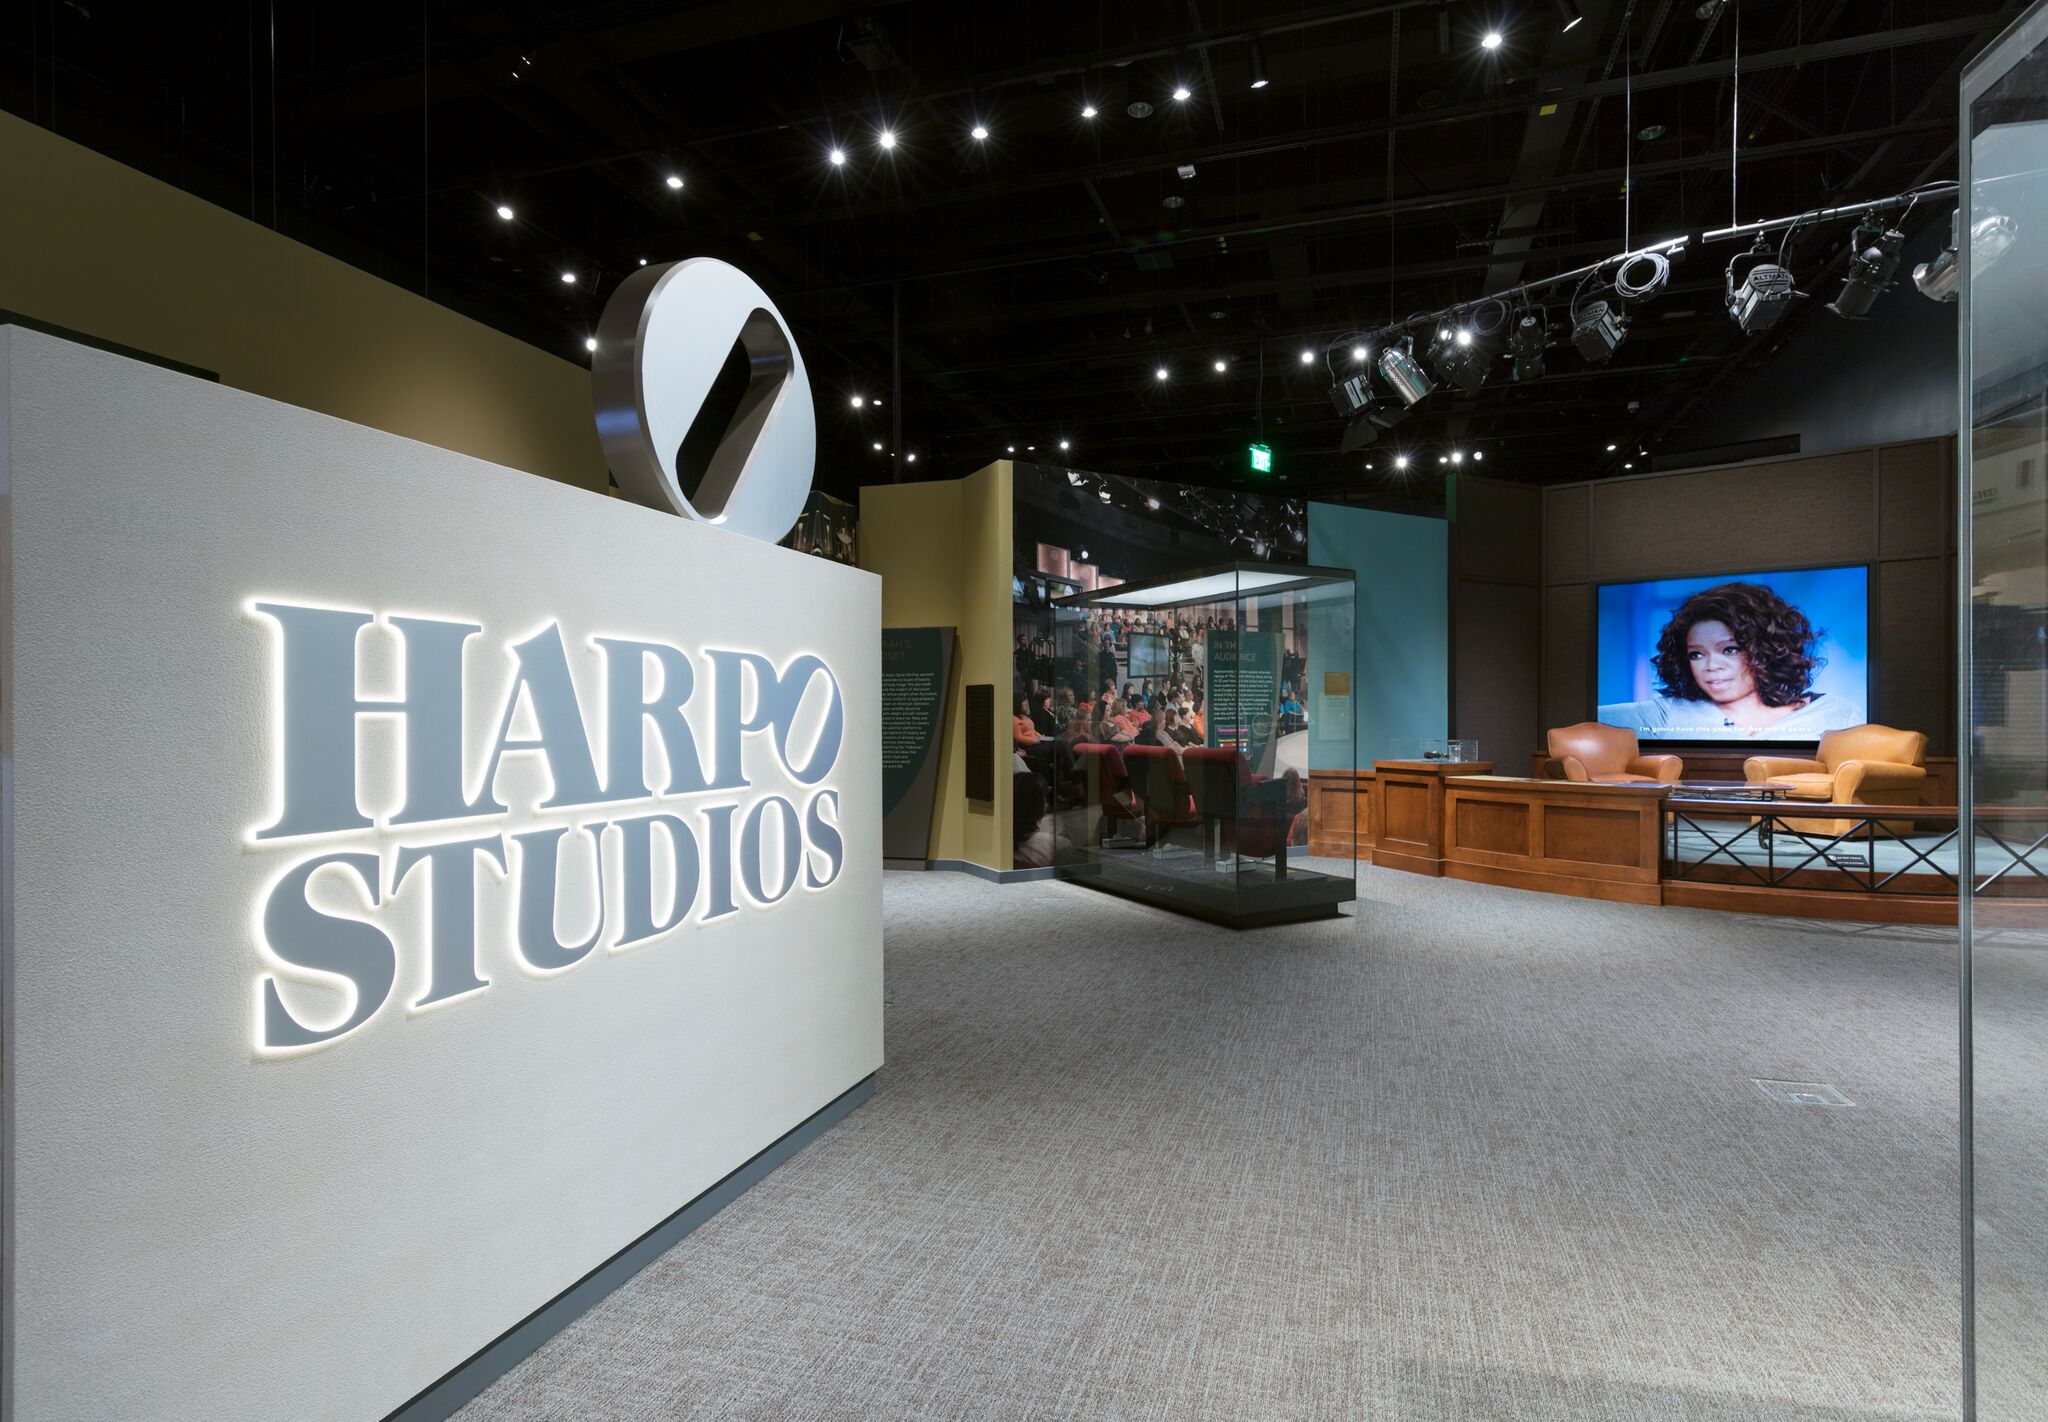 Pieces from the Harpo Studio set are featured in the Smithsonian's new temporary exhibit on Oprah Winfrey. (National Museum of African American History and Culture)